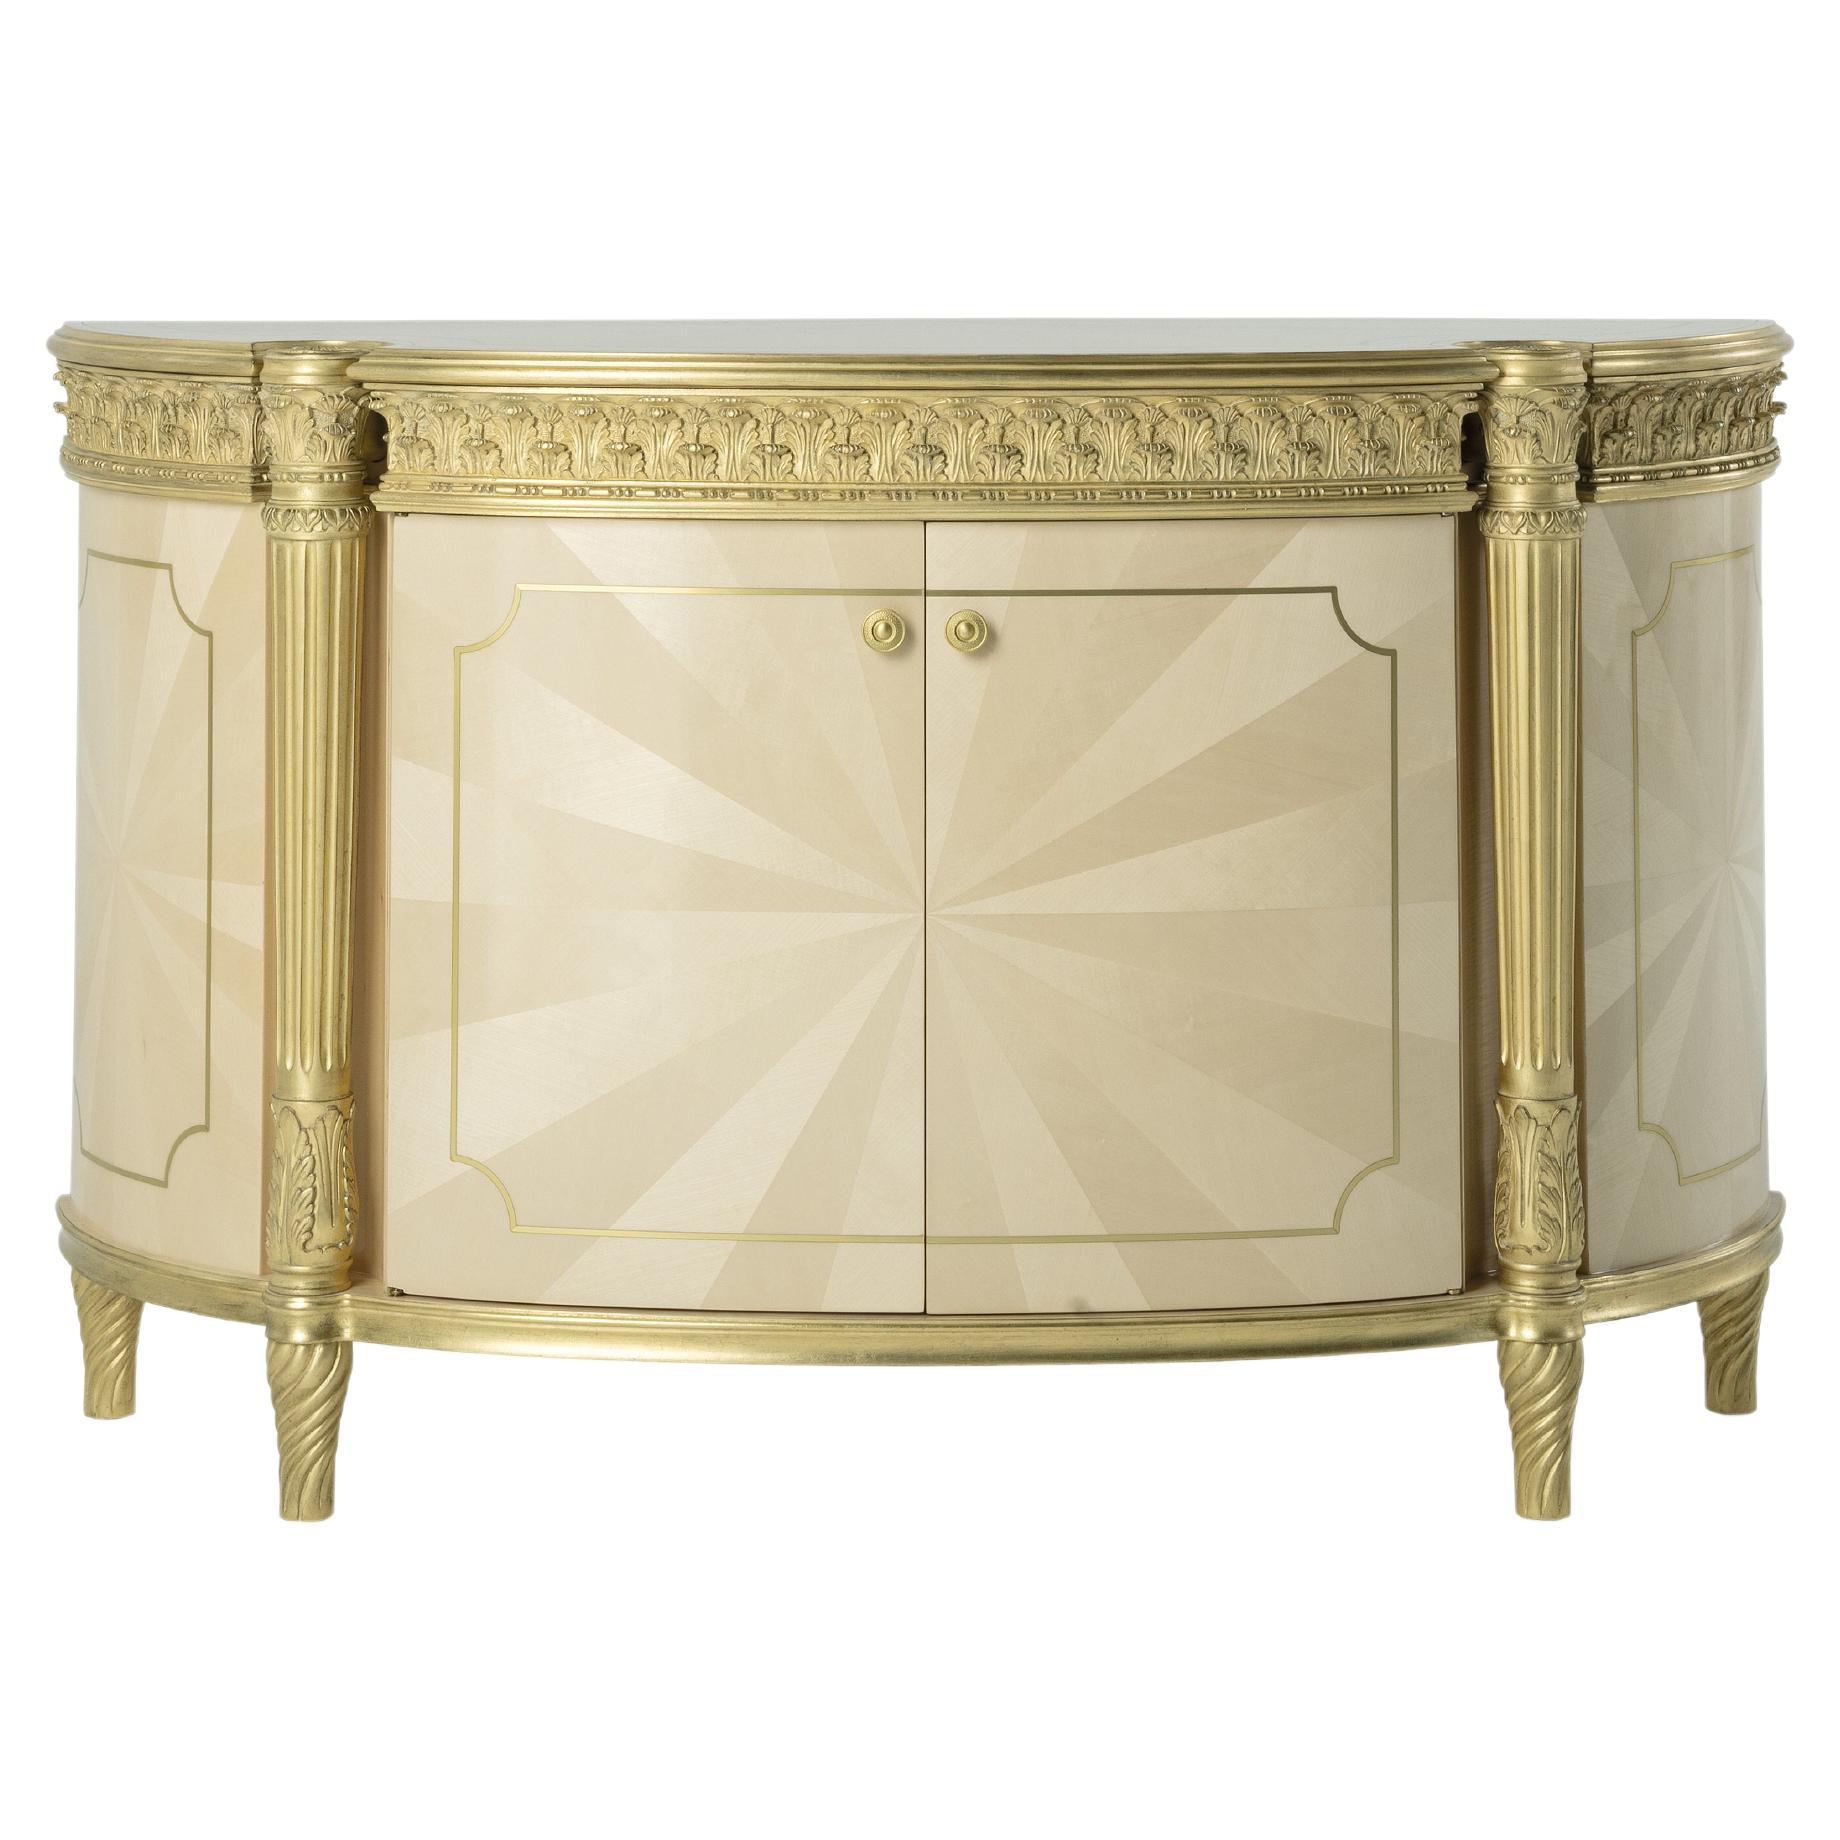 21st Century Boulevard Sideboard with Gold Leaf Finishing For Sale